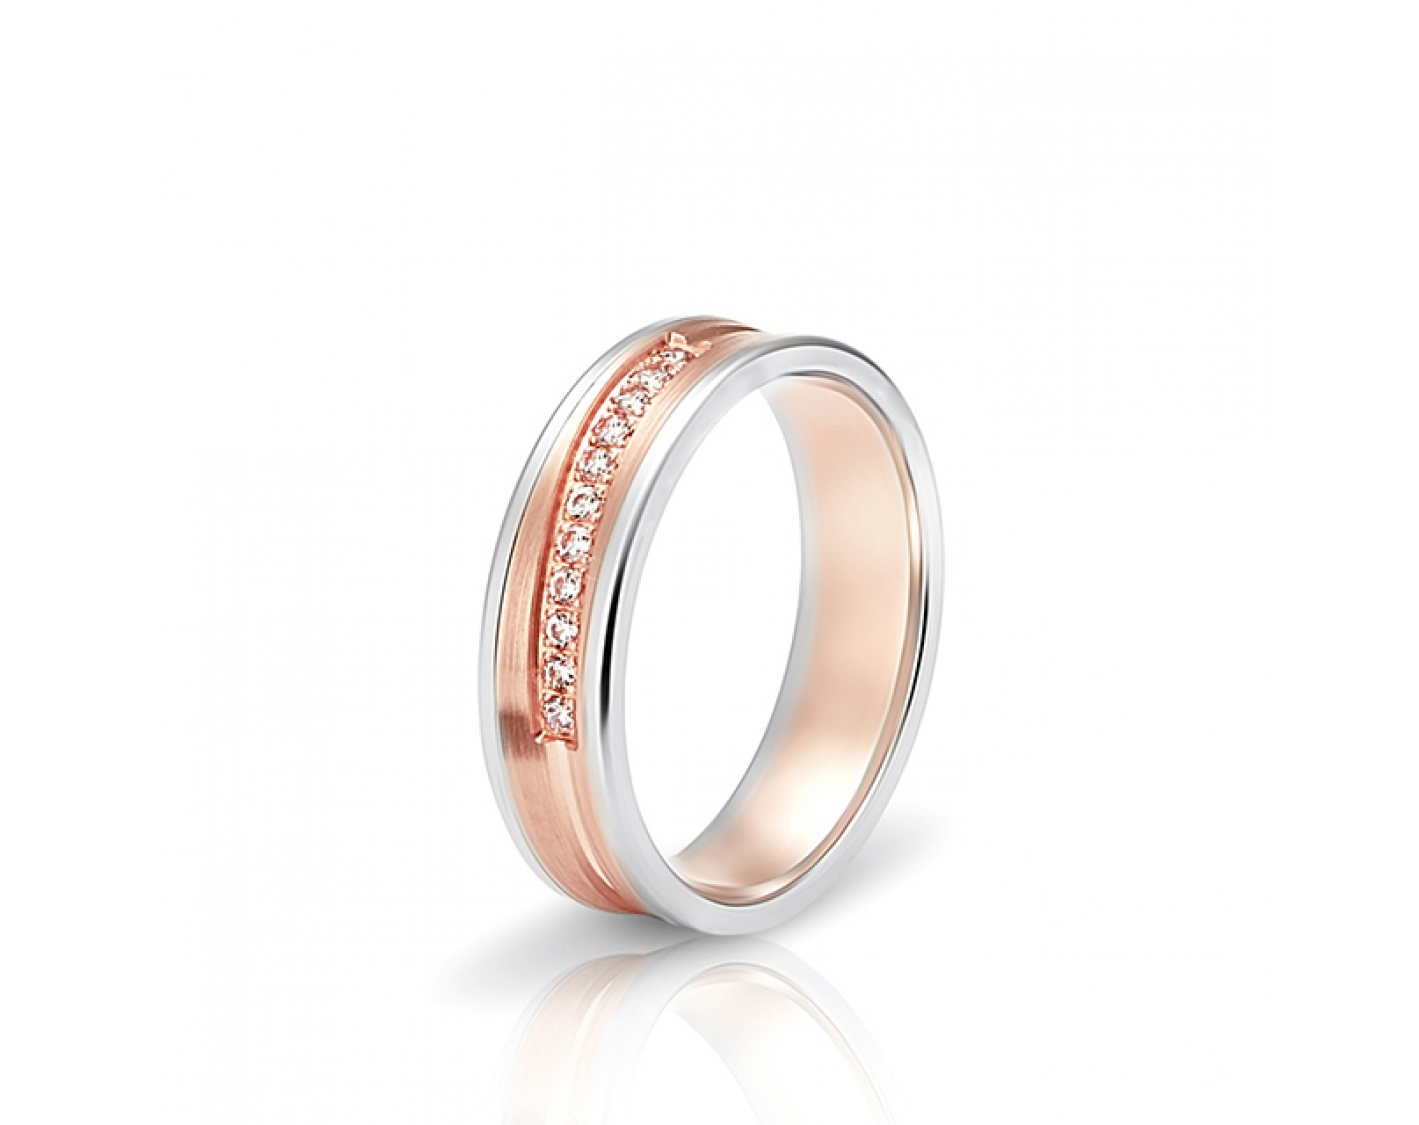 dual-tone 5,5mm two-toned* wedding band with diamonds